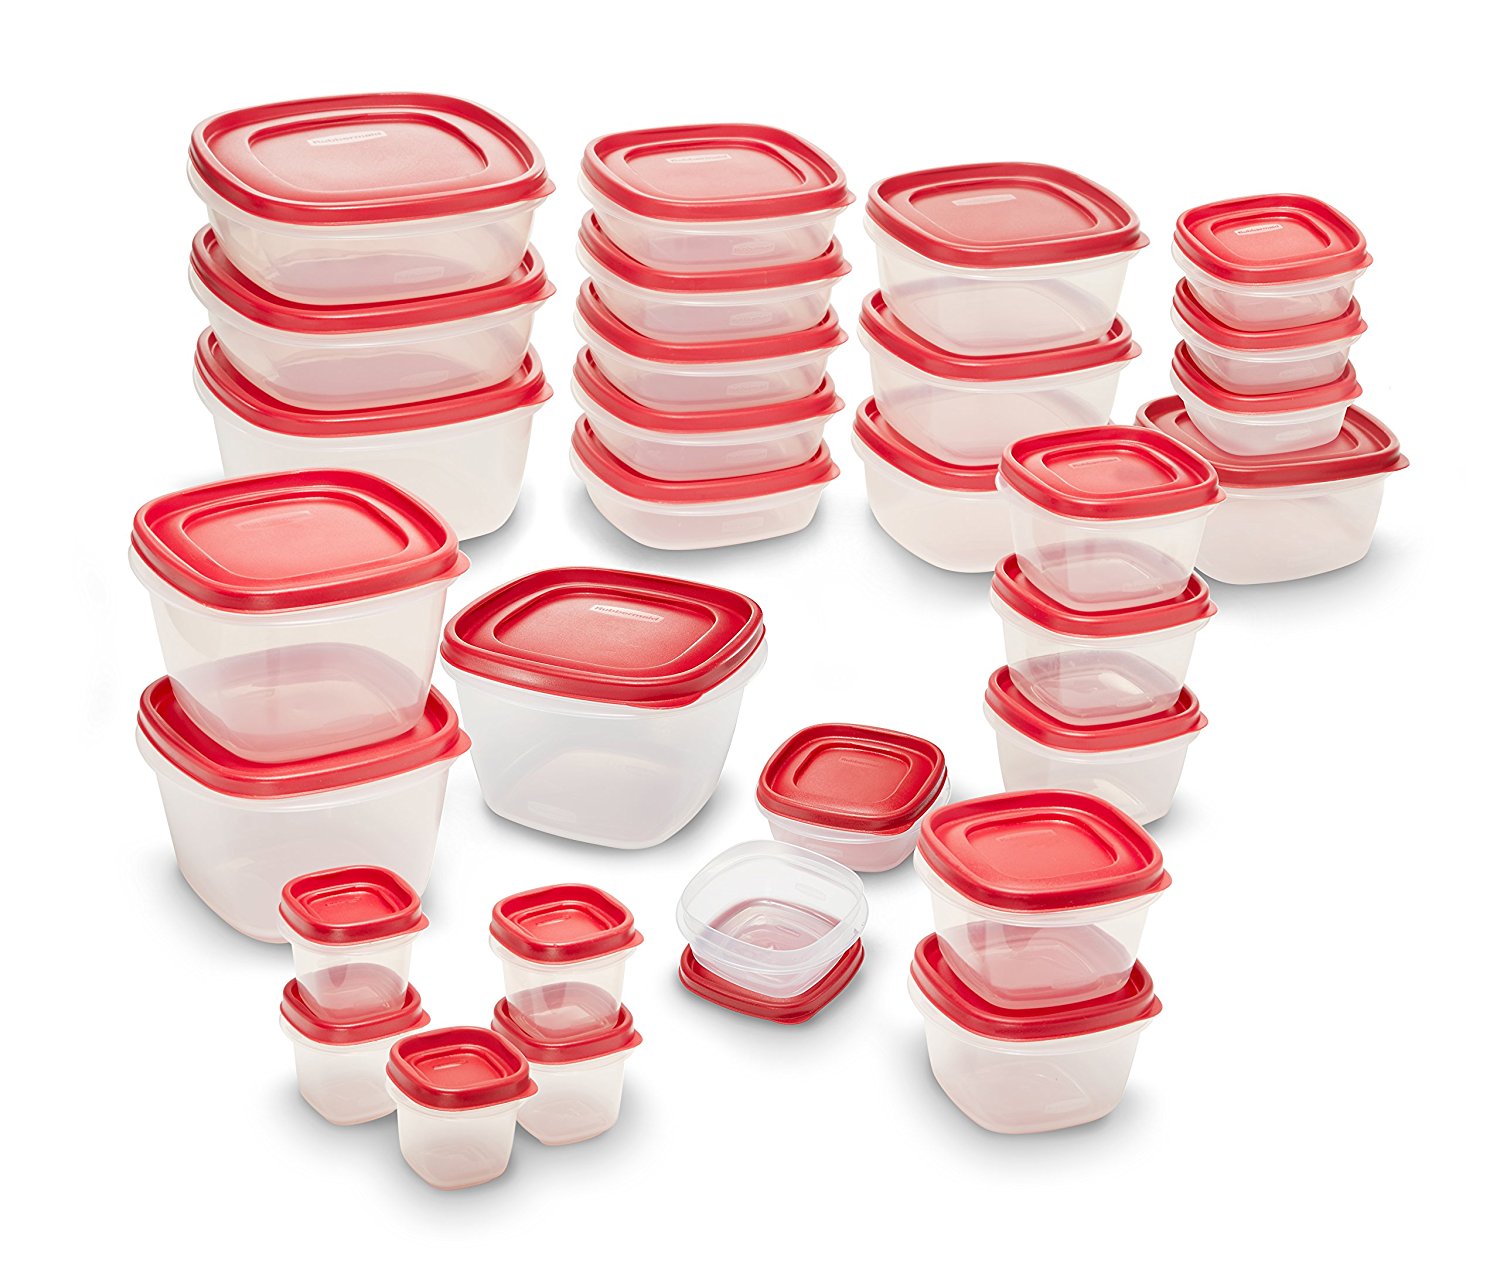 Rubbermaid Easy Find Lid 60 Piece Food Storage Container Set Only $22.19!